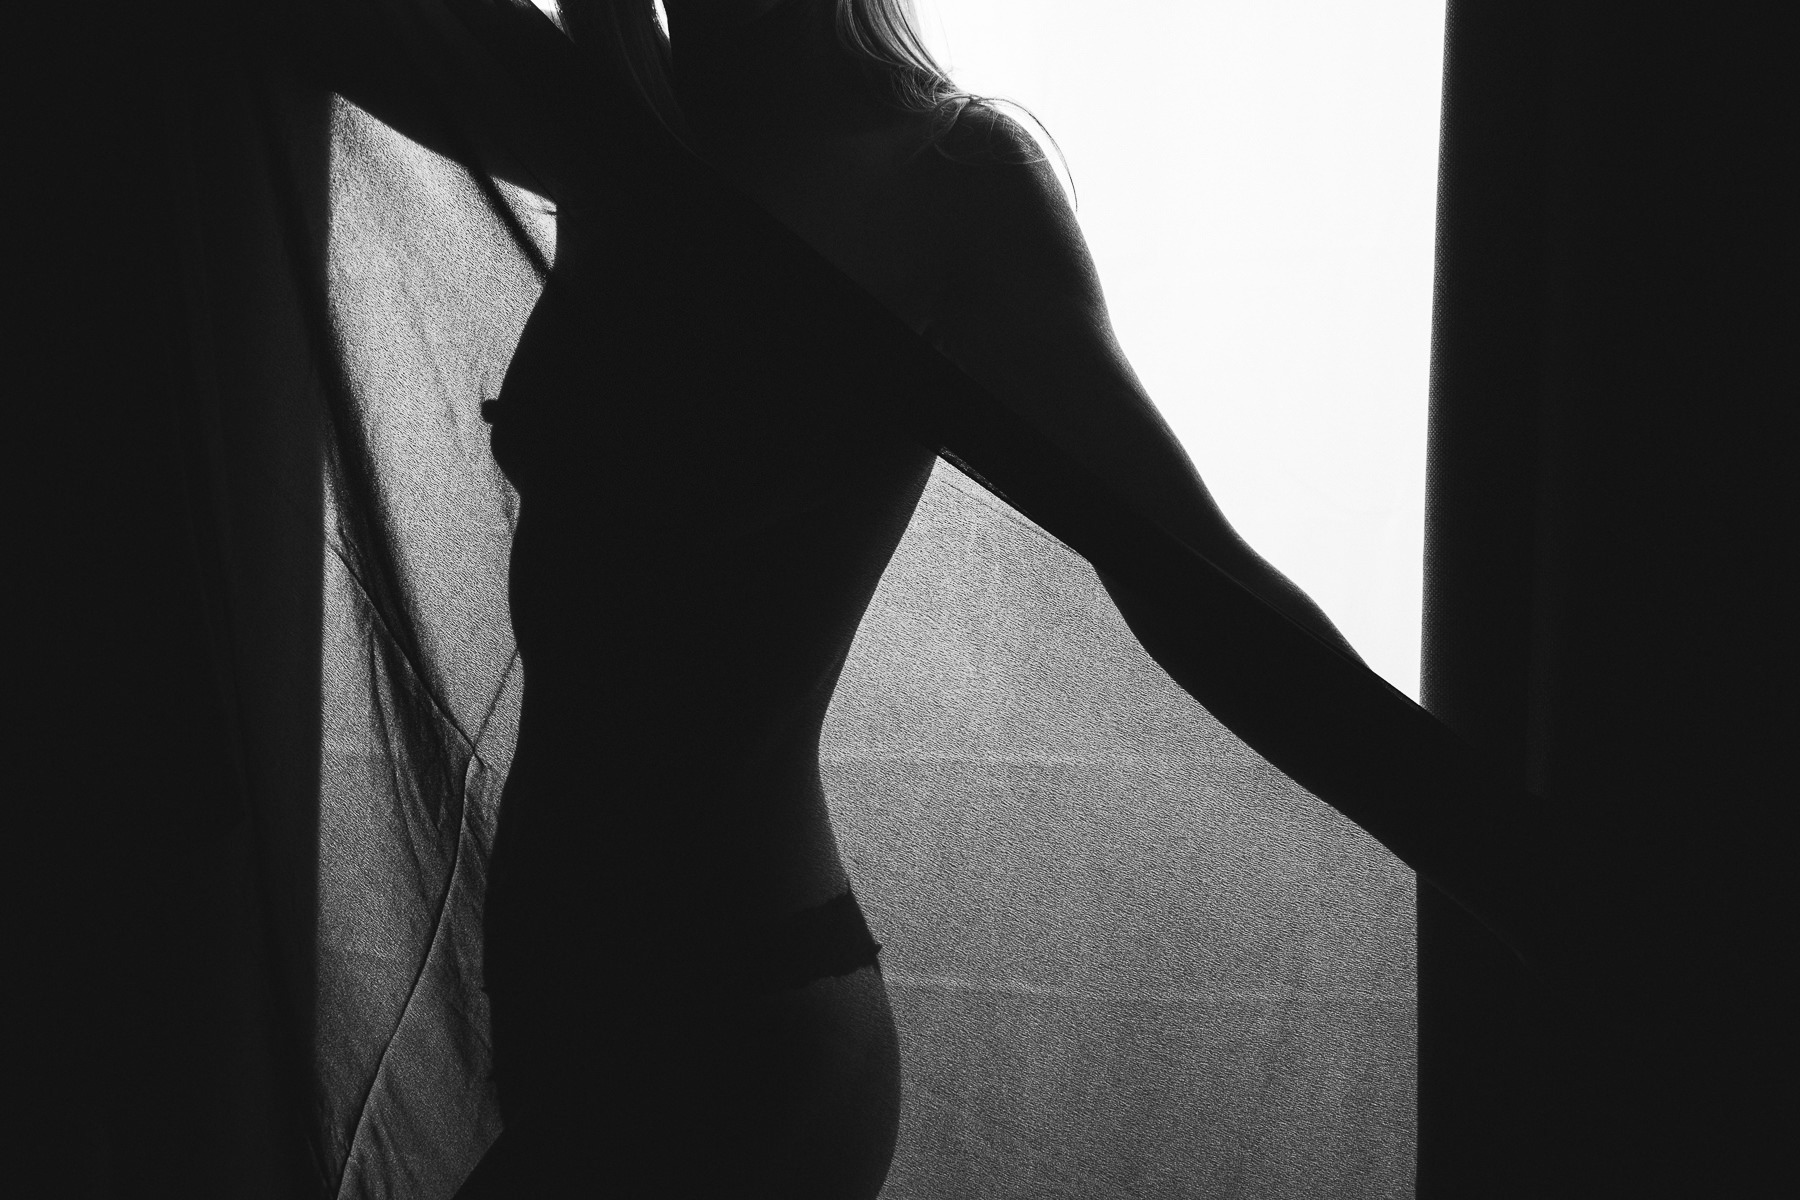 Black + white silhouette of a nude woman through a black sheer scarf